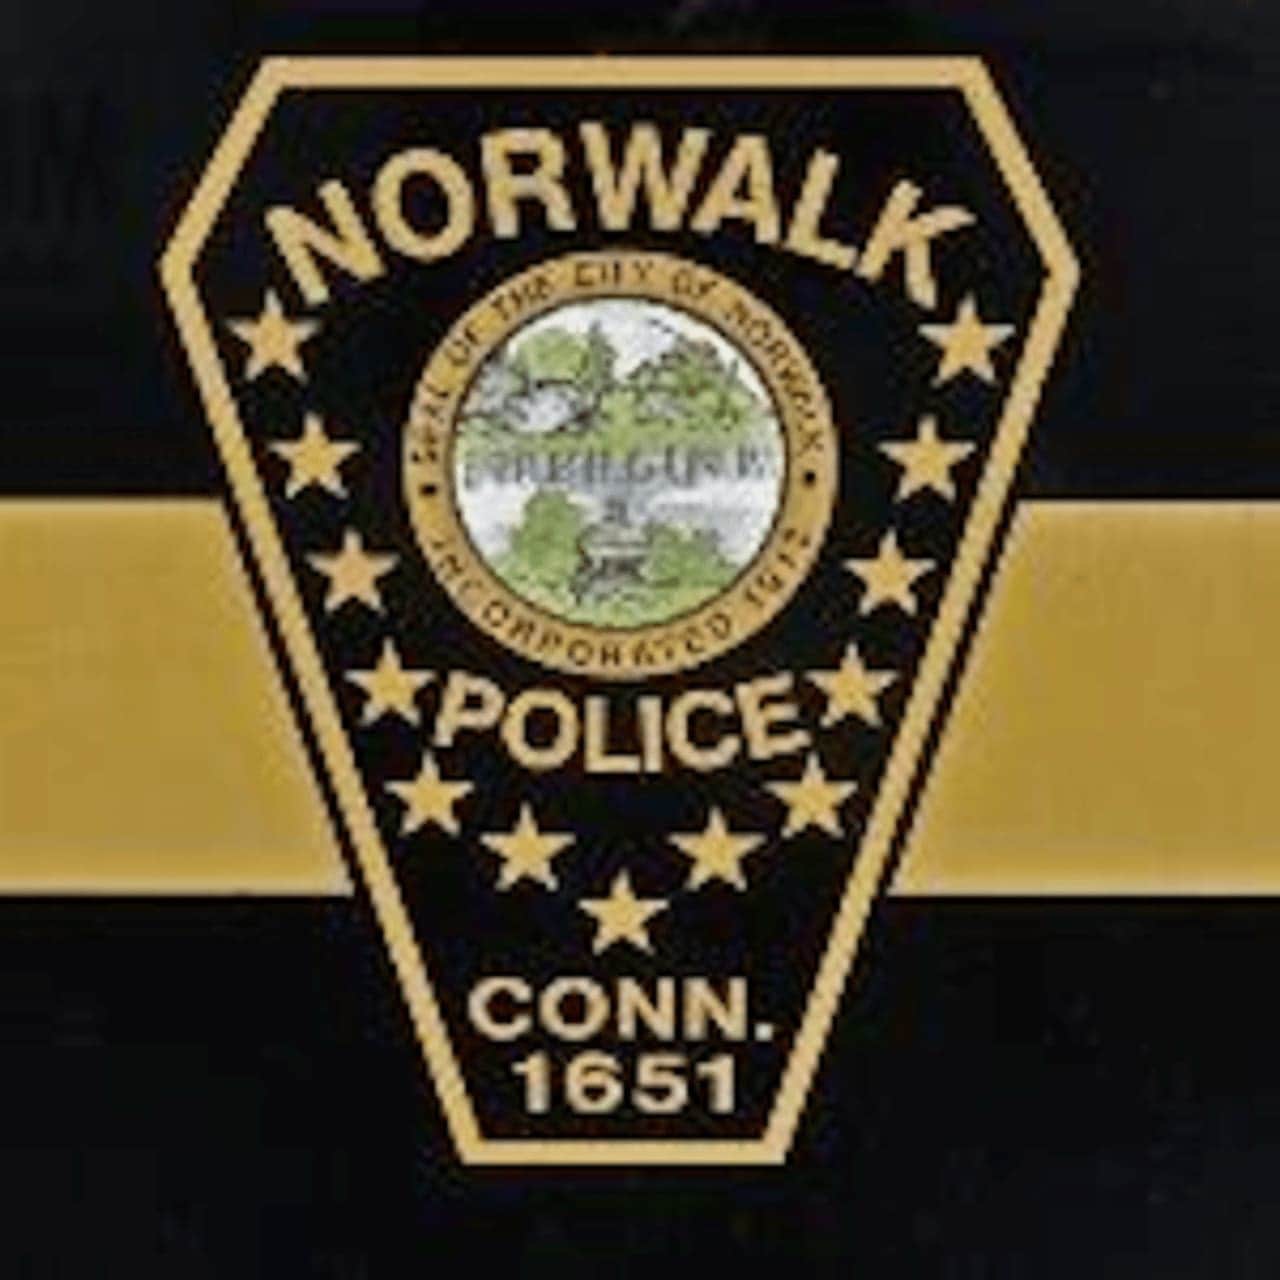 Police responding to a burglary at a Norwalk barbershop instead found evidence of drug activity, according to the Hour.